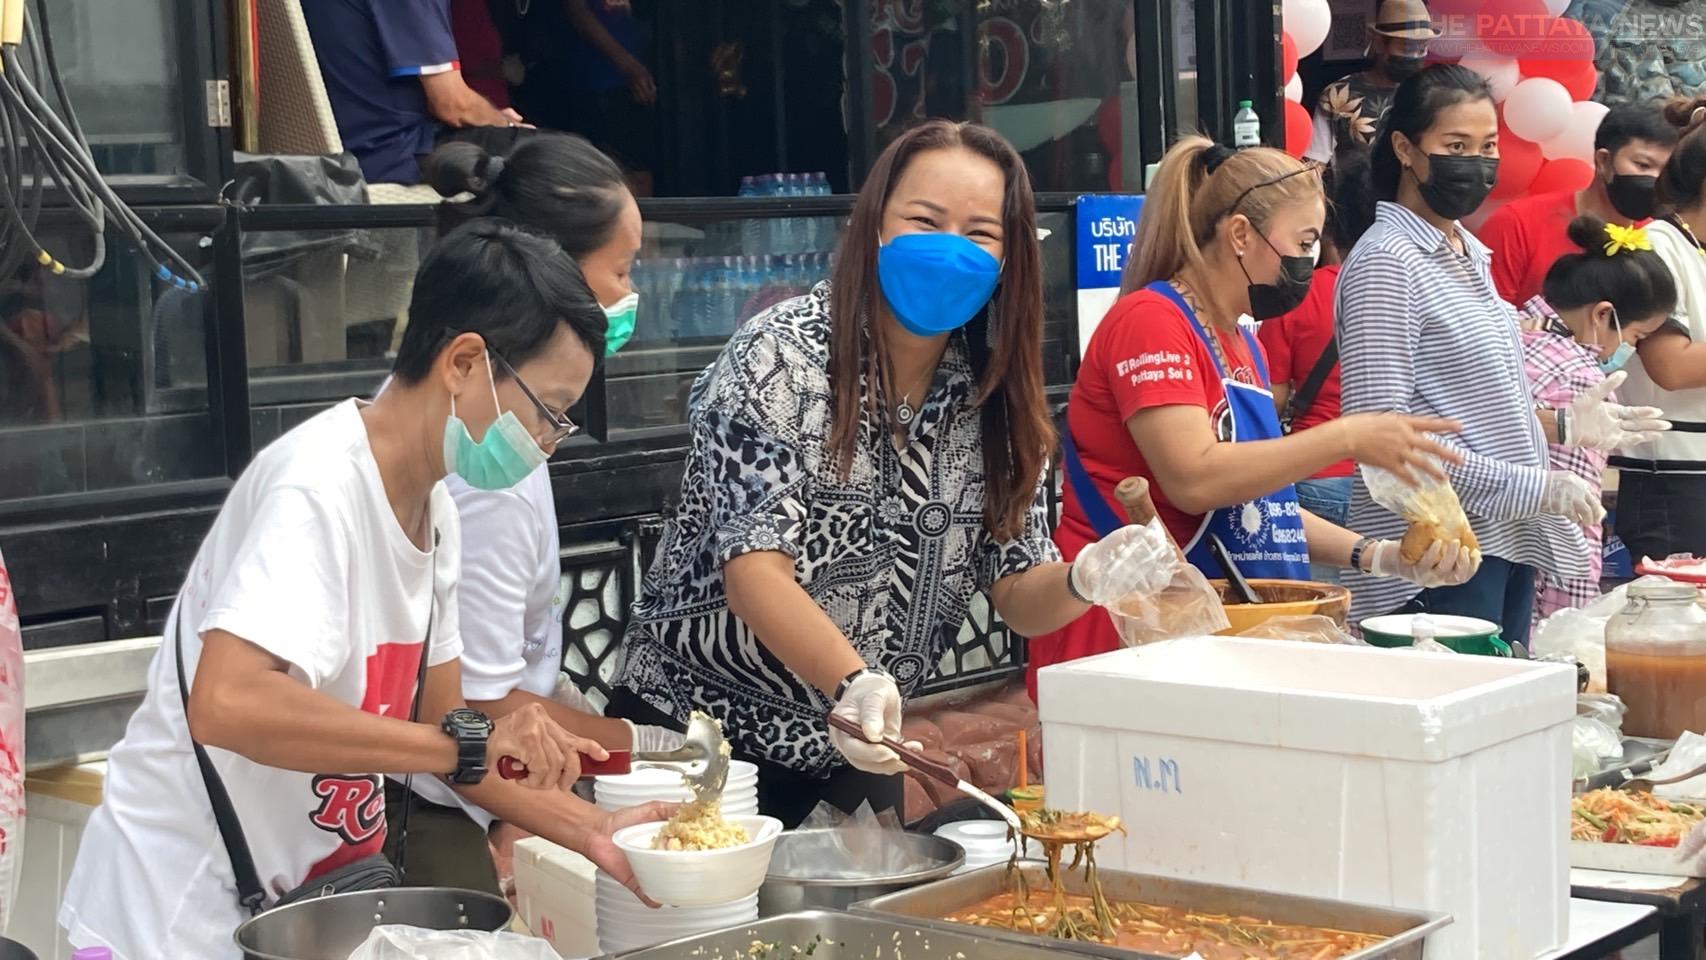 The Stone House’s owner “Amporn” hands out food to the needy to celebrate her 50th birthday on Pattaya Walking Street